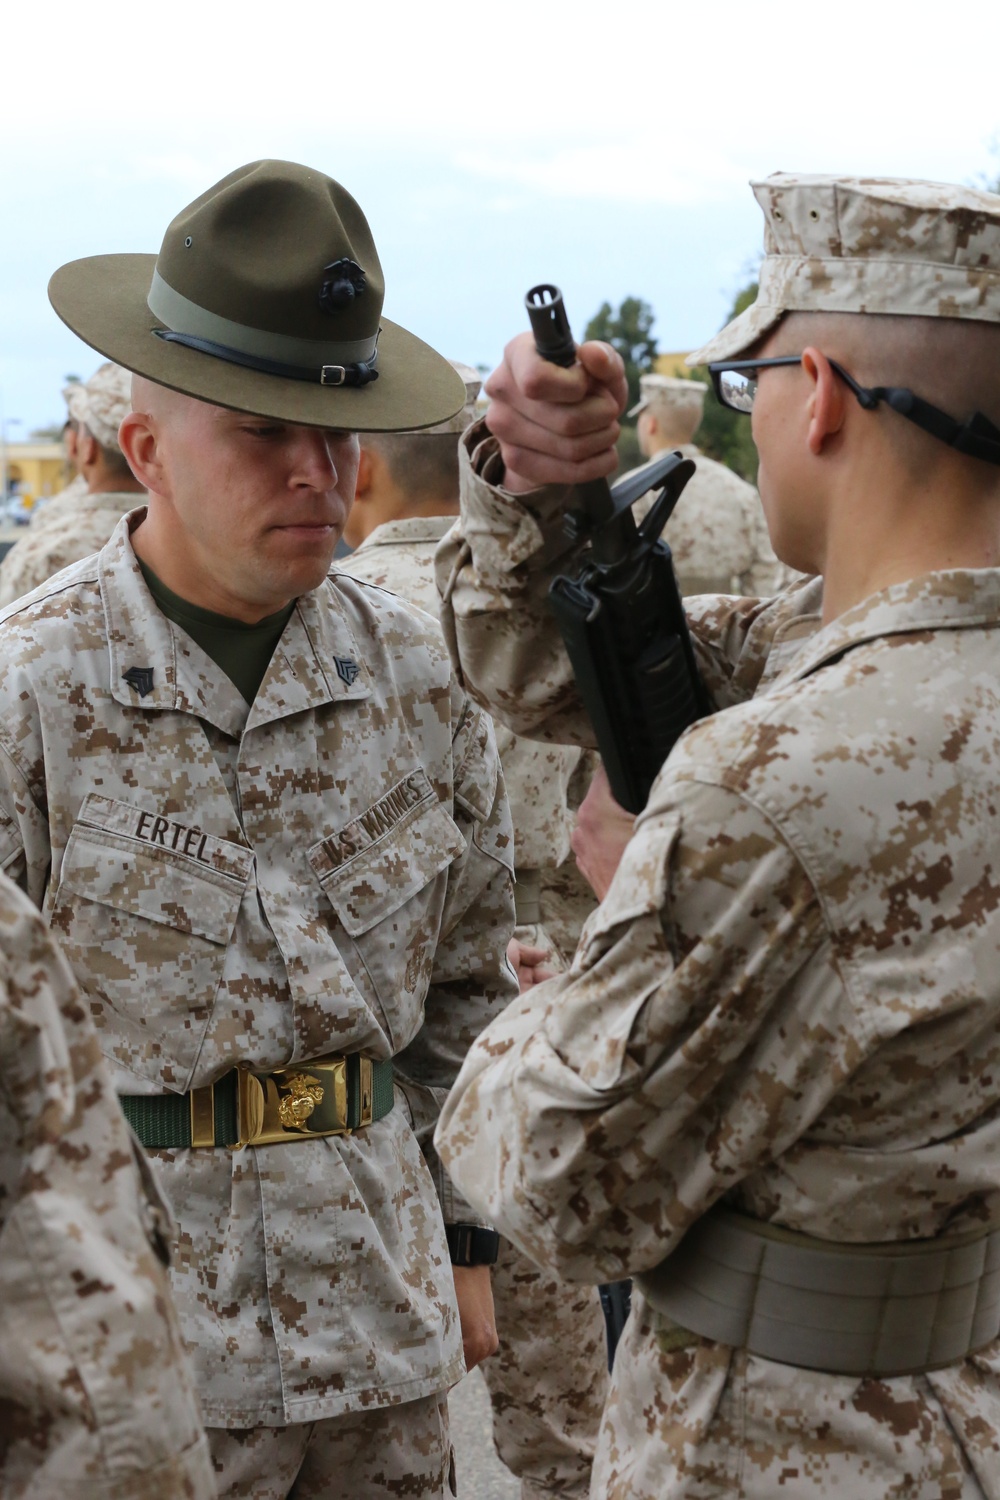 Co. D experiences first Marine Corps inspection